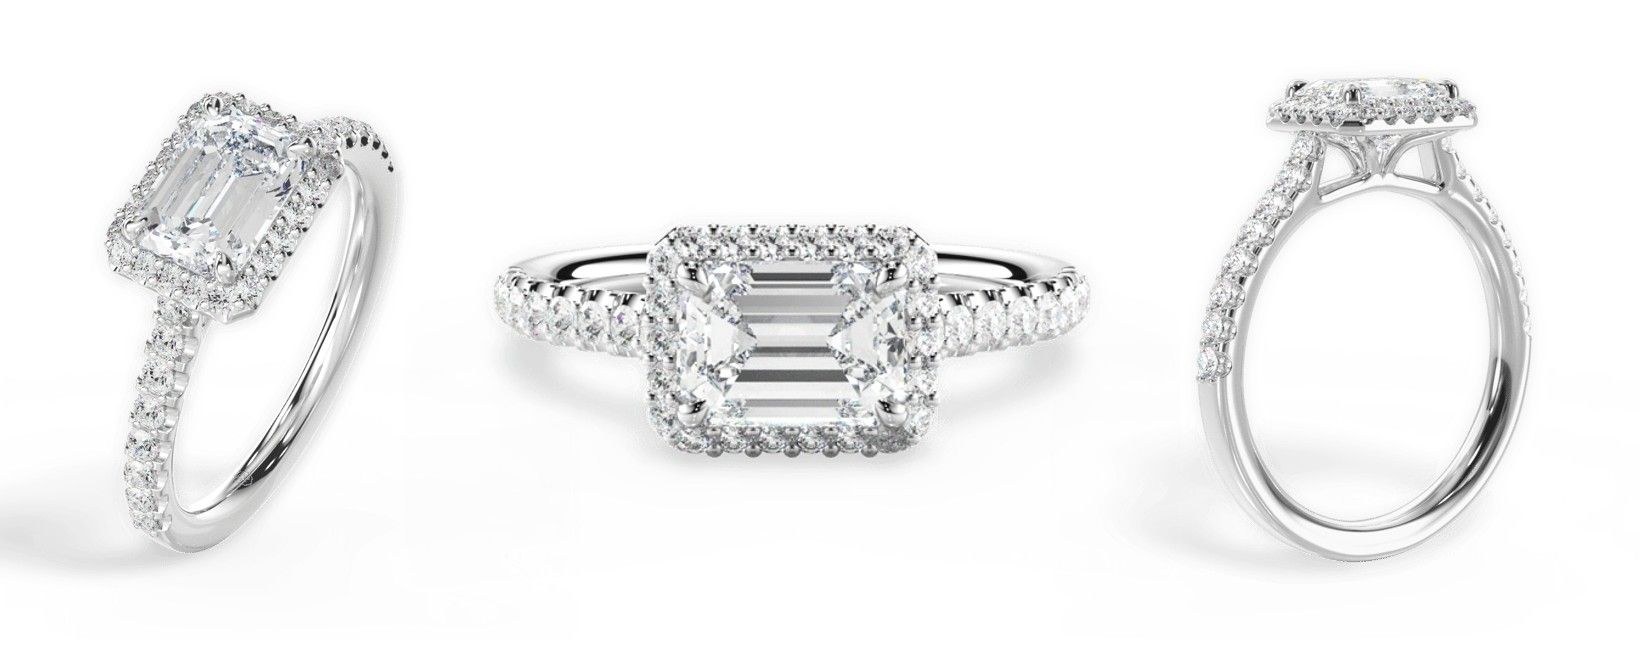 Exciting and Emerging Engagement Rings Trends—Get Inspired!  image1